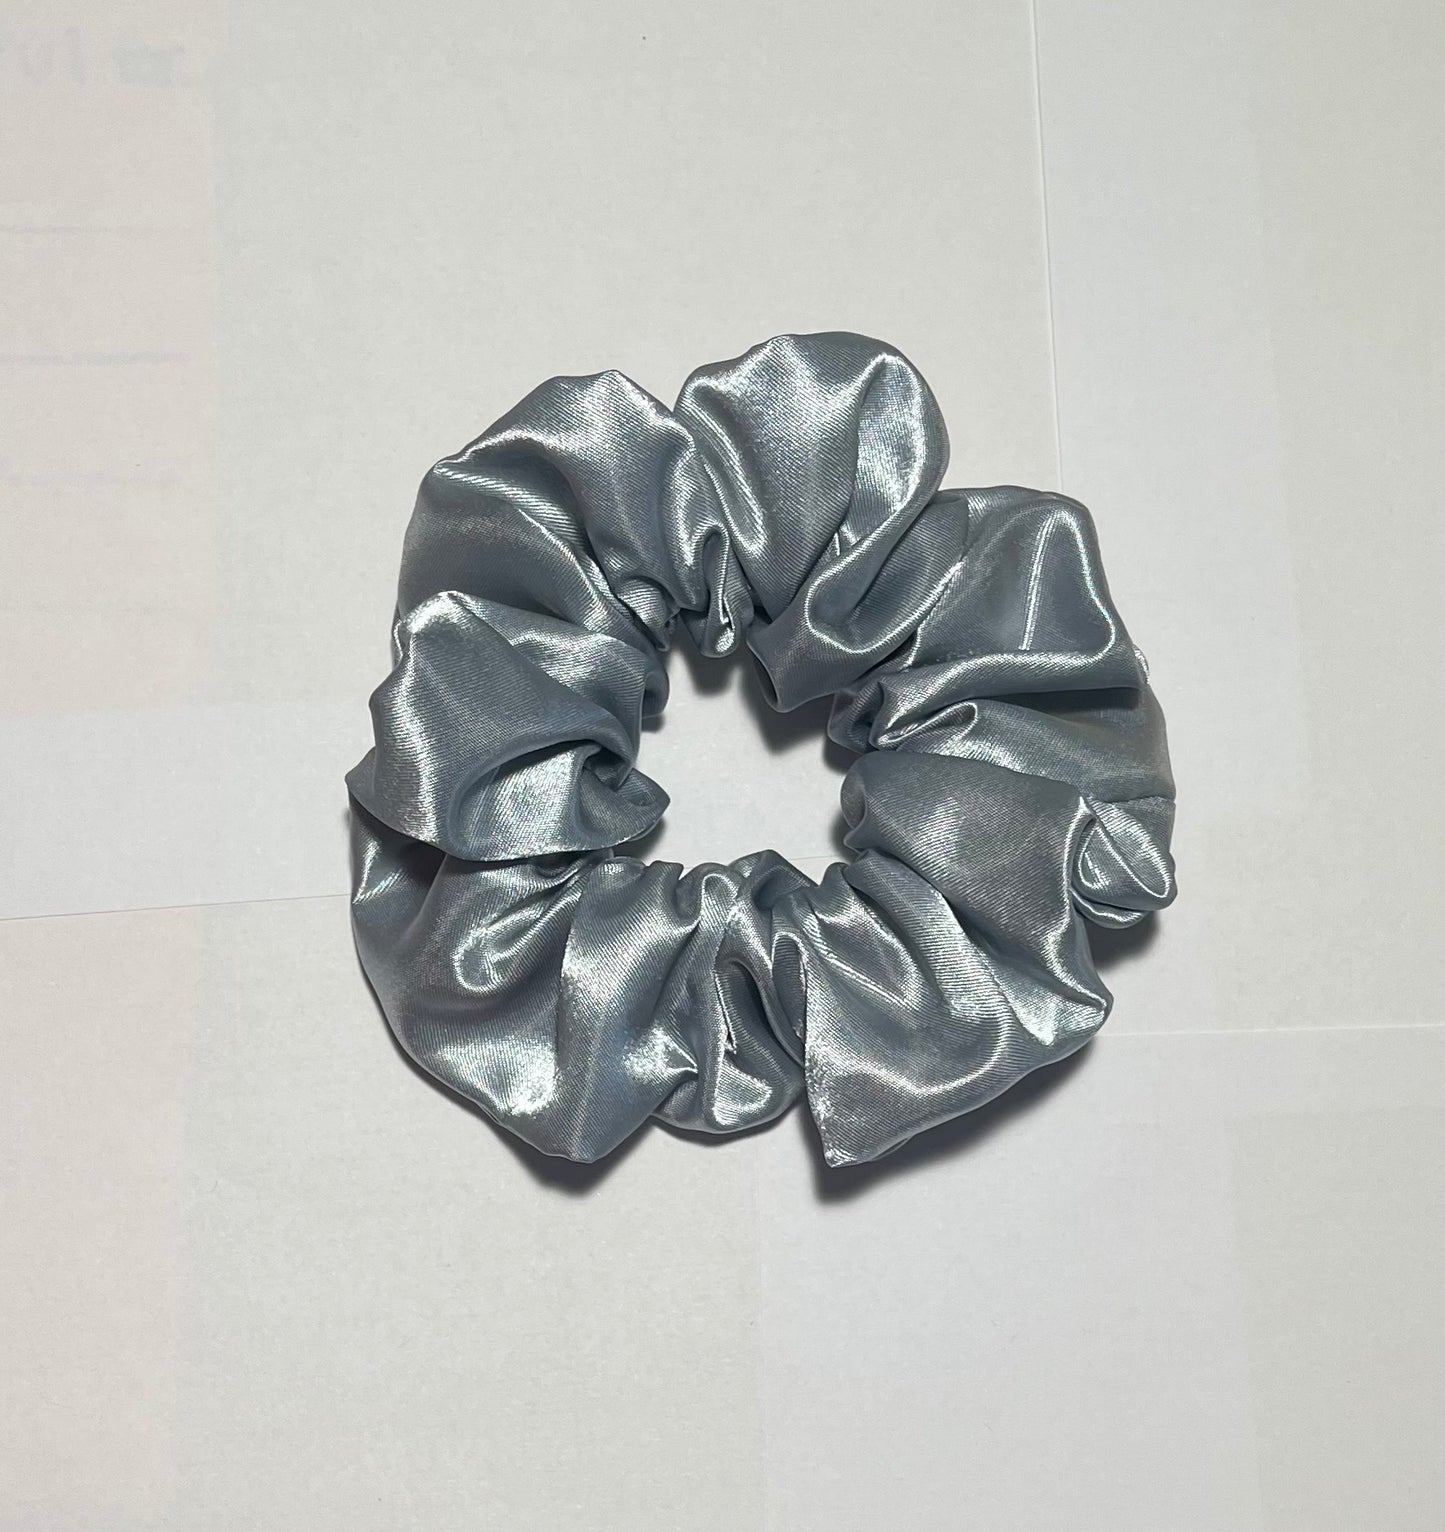 Silk, Satin Scrunchie - Small  20 Colors Available. Free scrunchie holder.